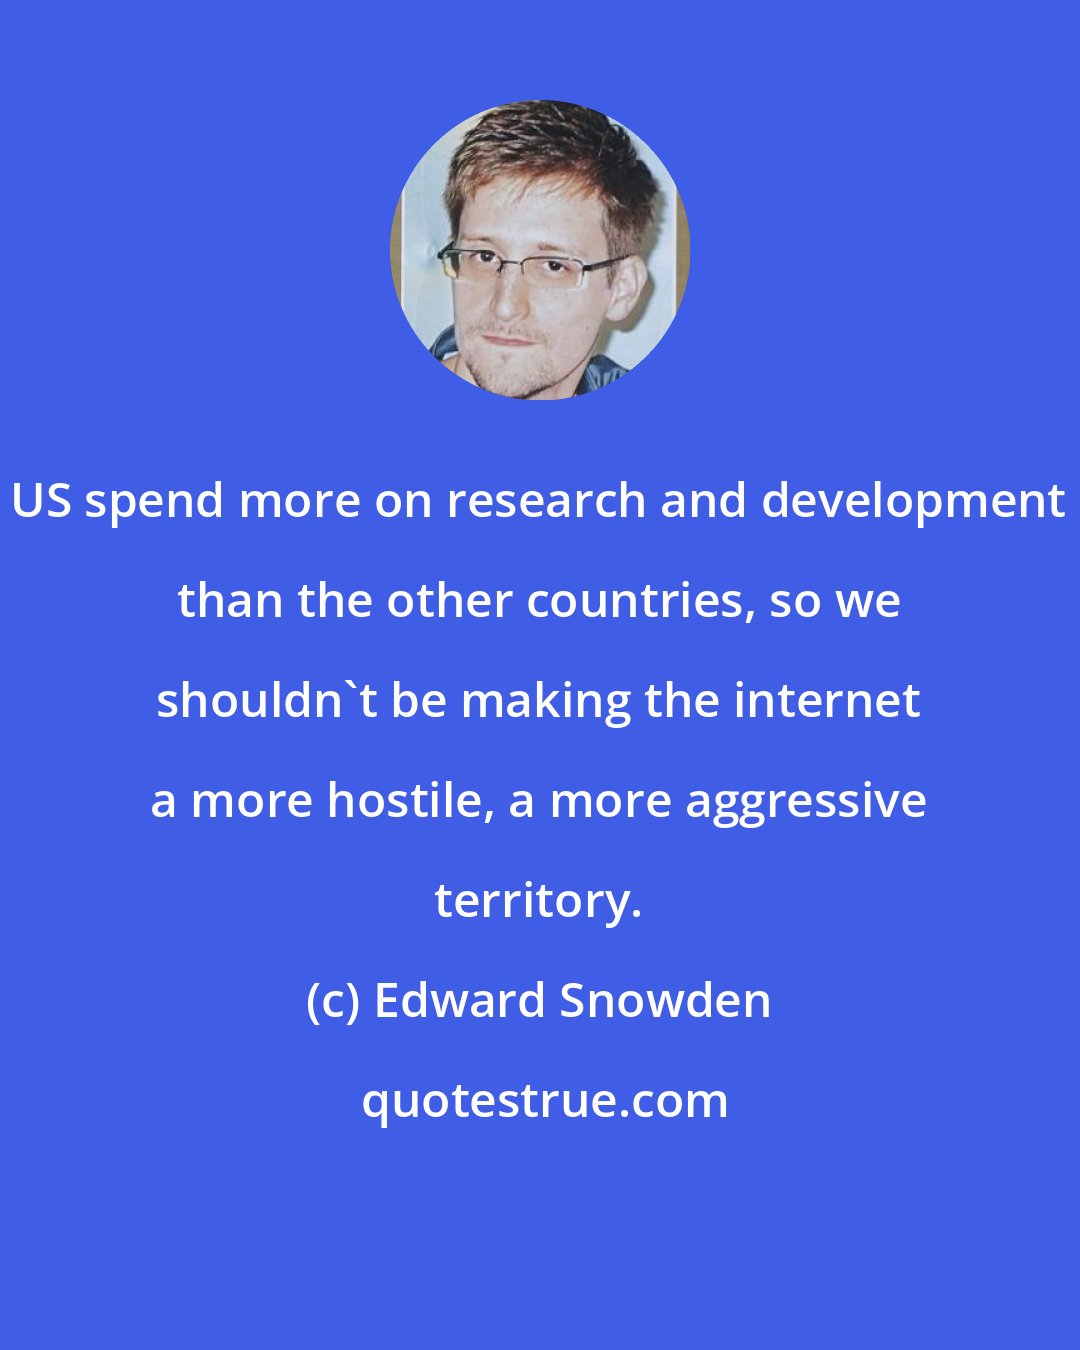 Edward Snowden: US spend more on research and development than the other countries, so we shouldn't be making the internet a more hostile, a more aggressive territory.